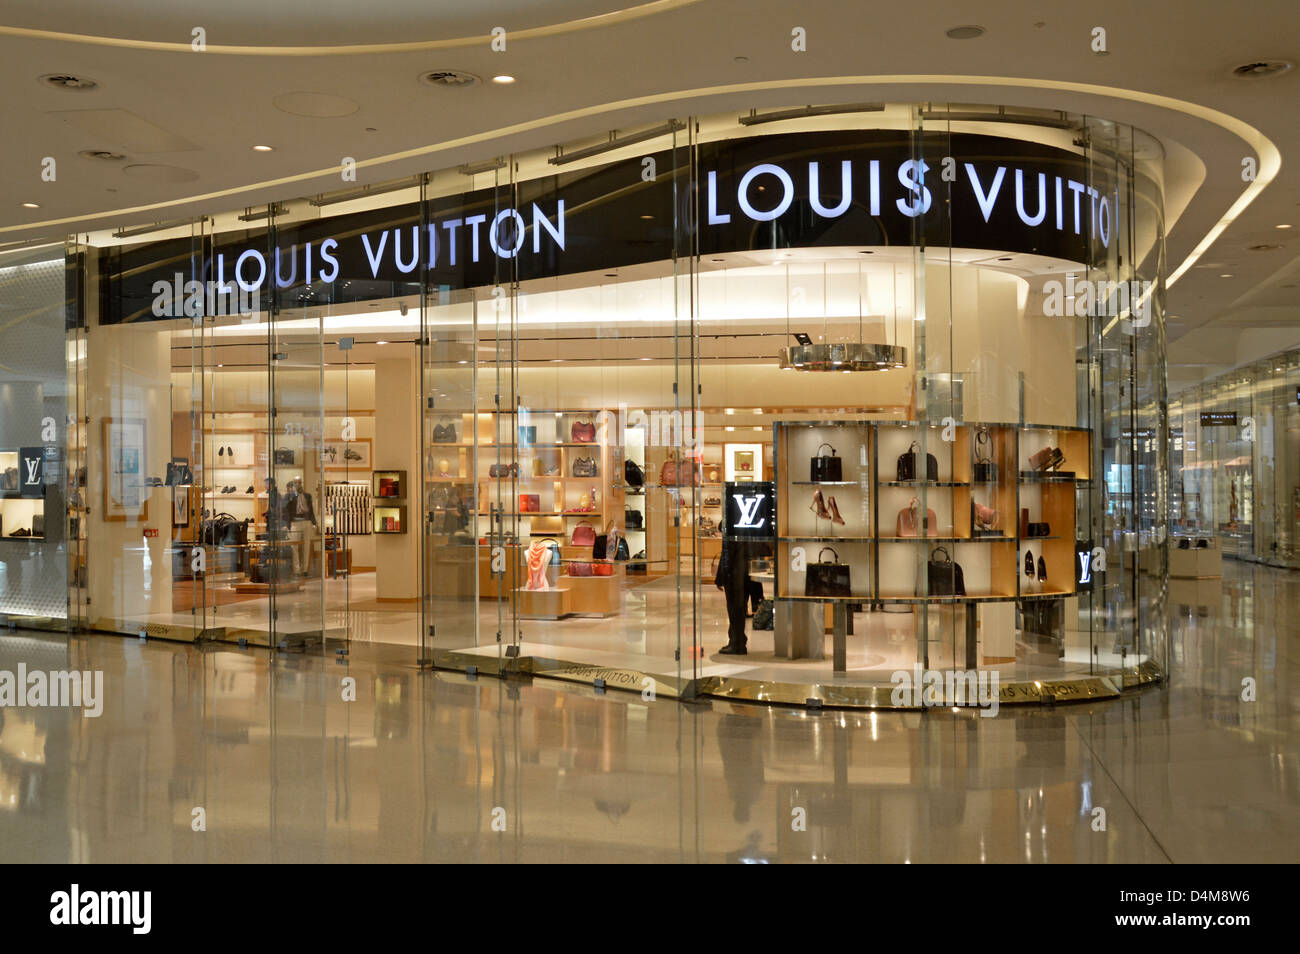 Louis Vuitton handbag store window shop front display in the Stock Photo, Royalty Free Image ...